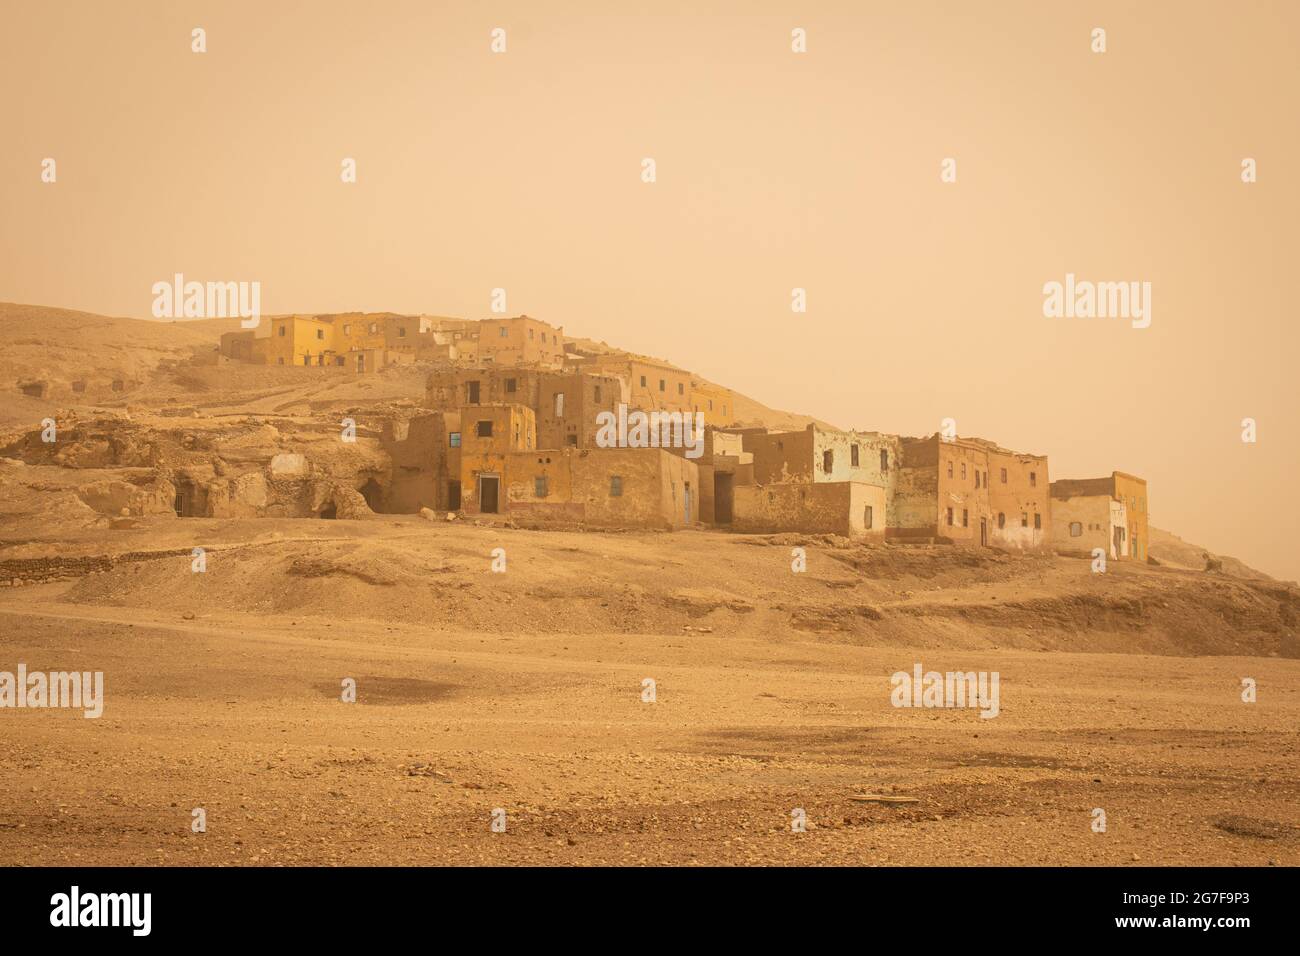 Luxor looking orange early in the morning after a sand storm, Egypt Stock Photo